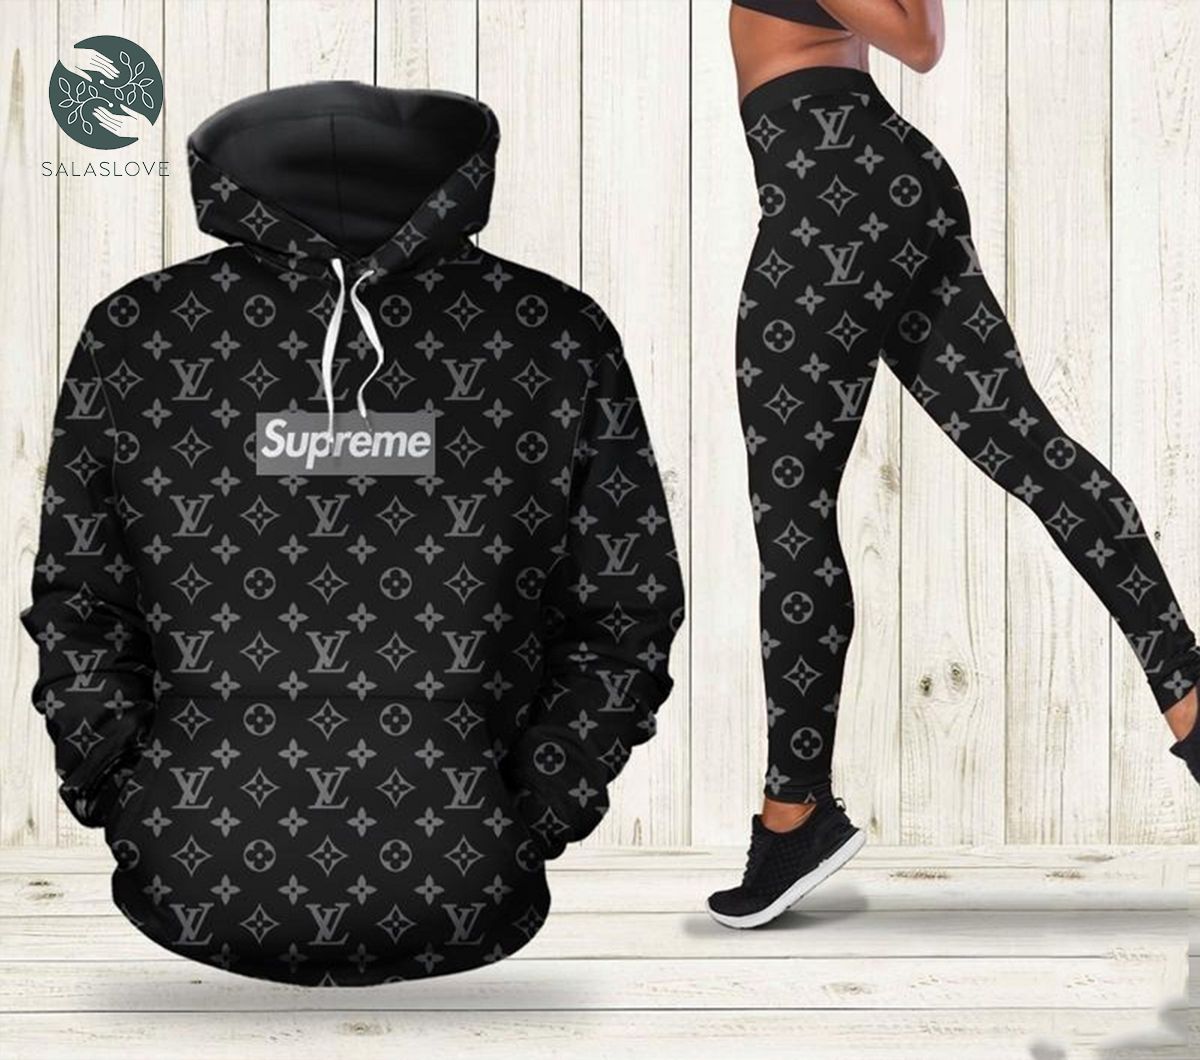 Louis vuitton luxury brand 3d hoodie and leggings set lv gifts